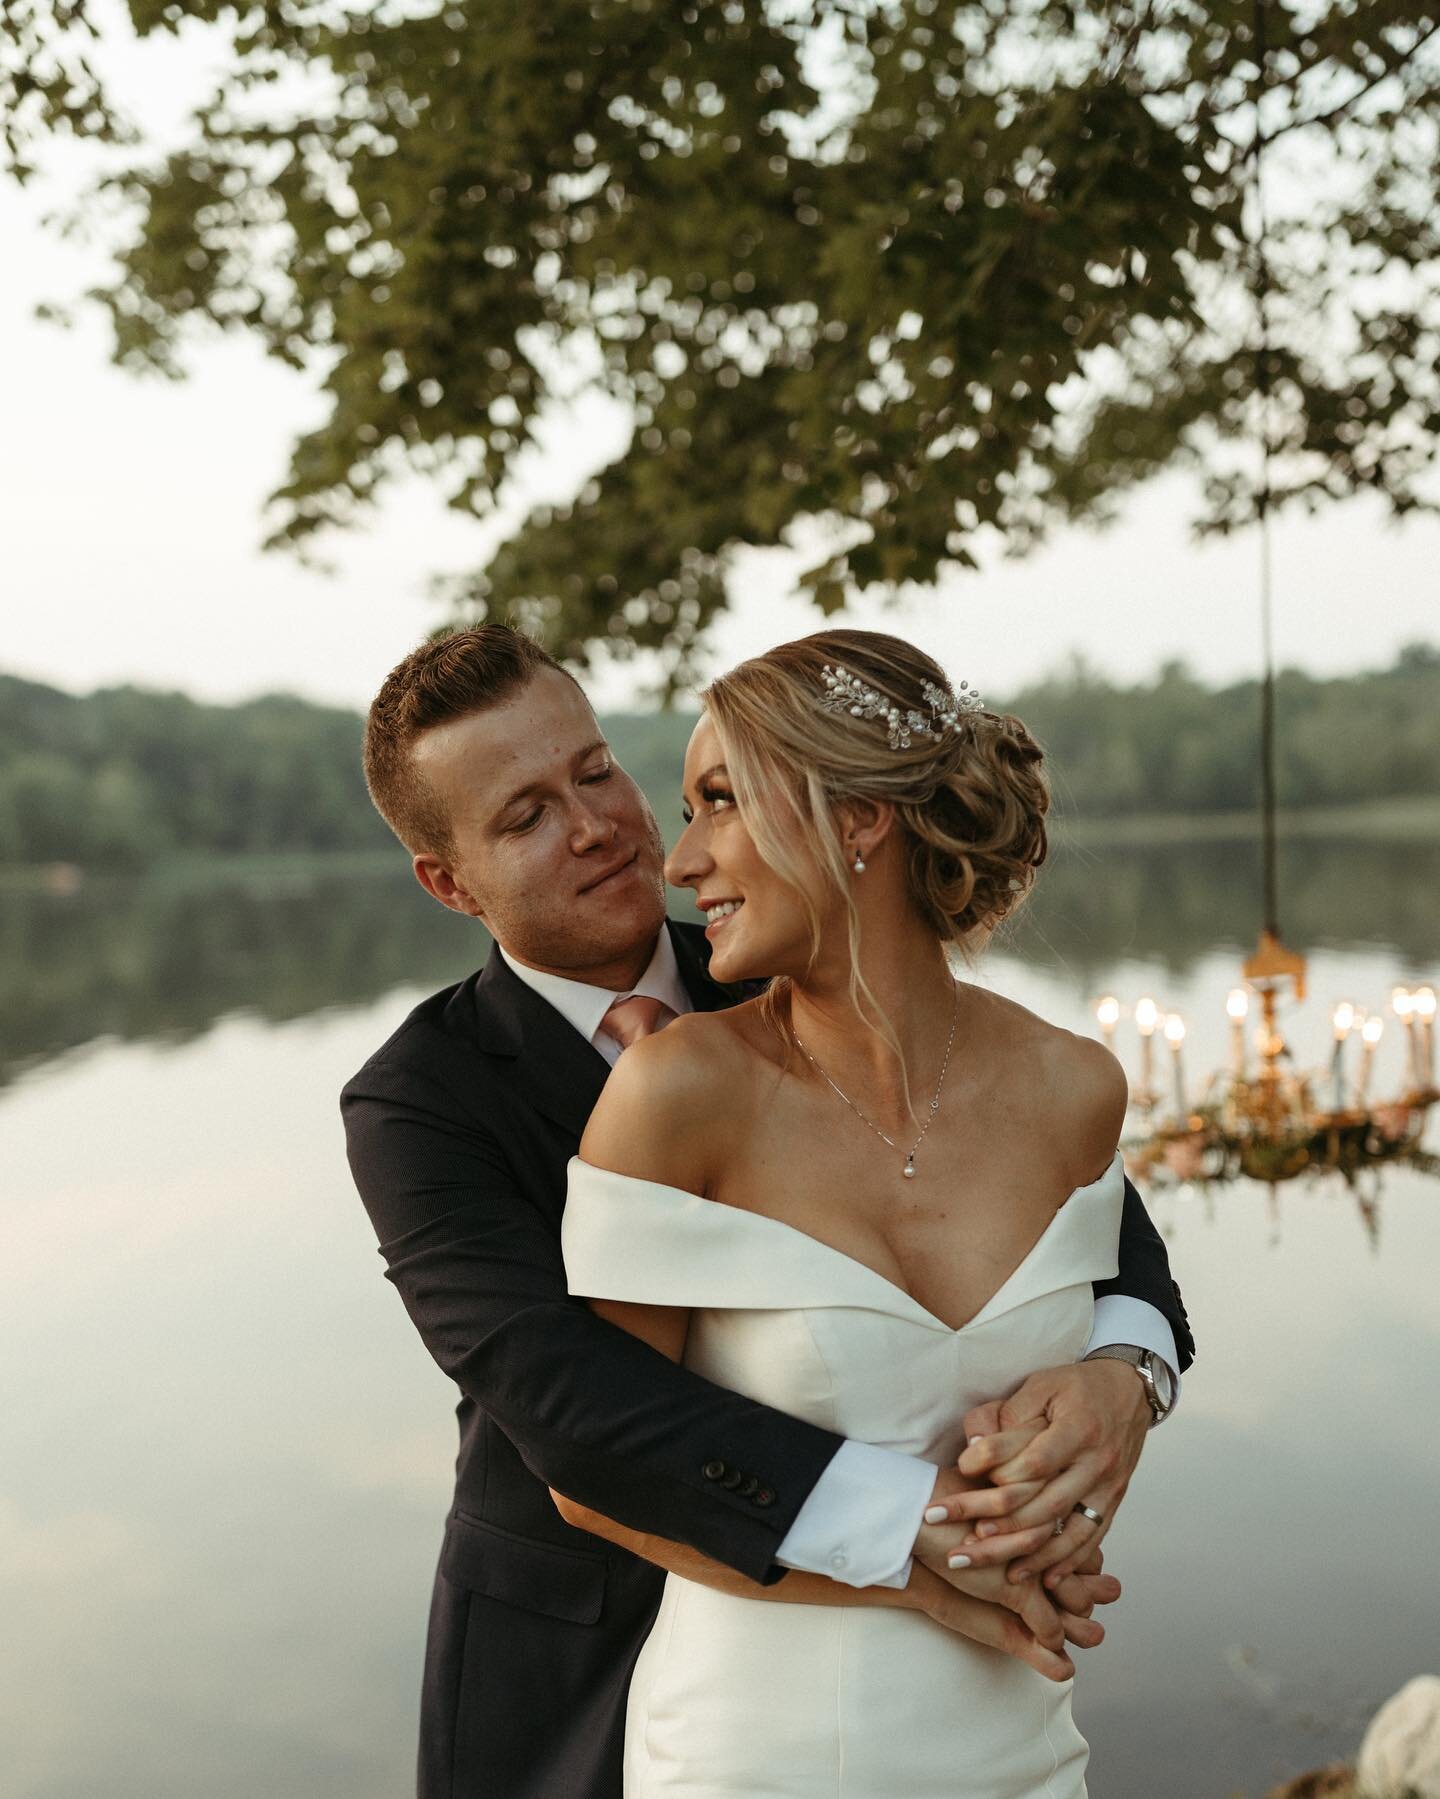 @polishbanana &amp; @danbasoff planned the most gorgeous intimate wedding at @andreslakeside with the help of @bad_boss_bride 💐 Following a lakeside ceremony, the newlyweds dined under twinkle lights with their families ✨ Their adorable pup was even